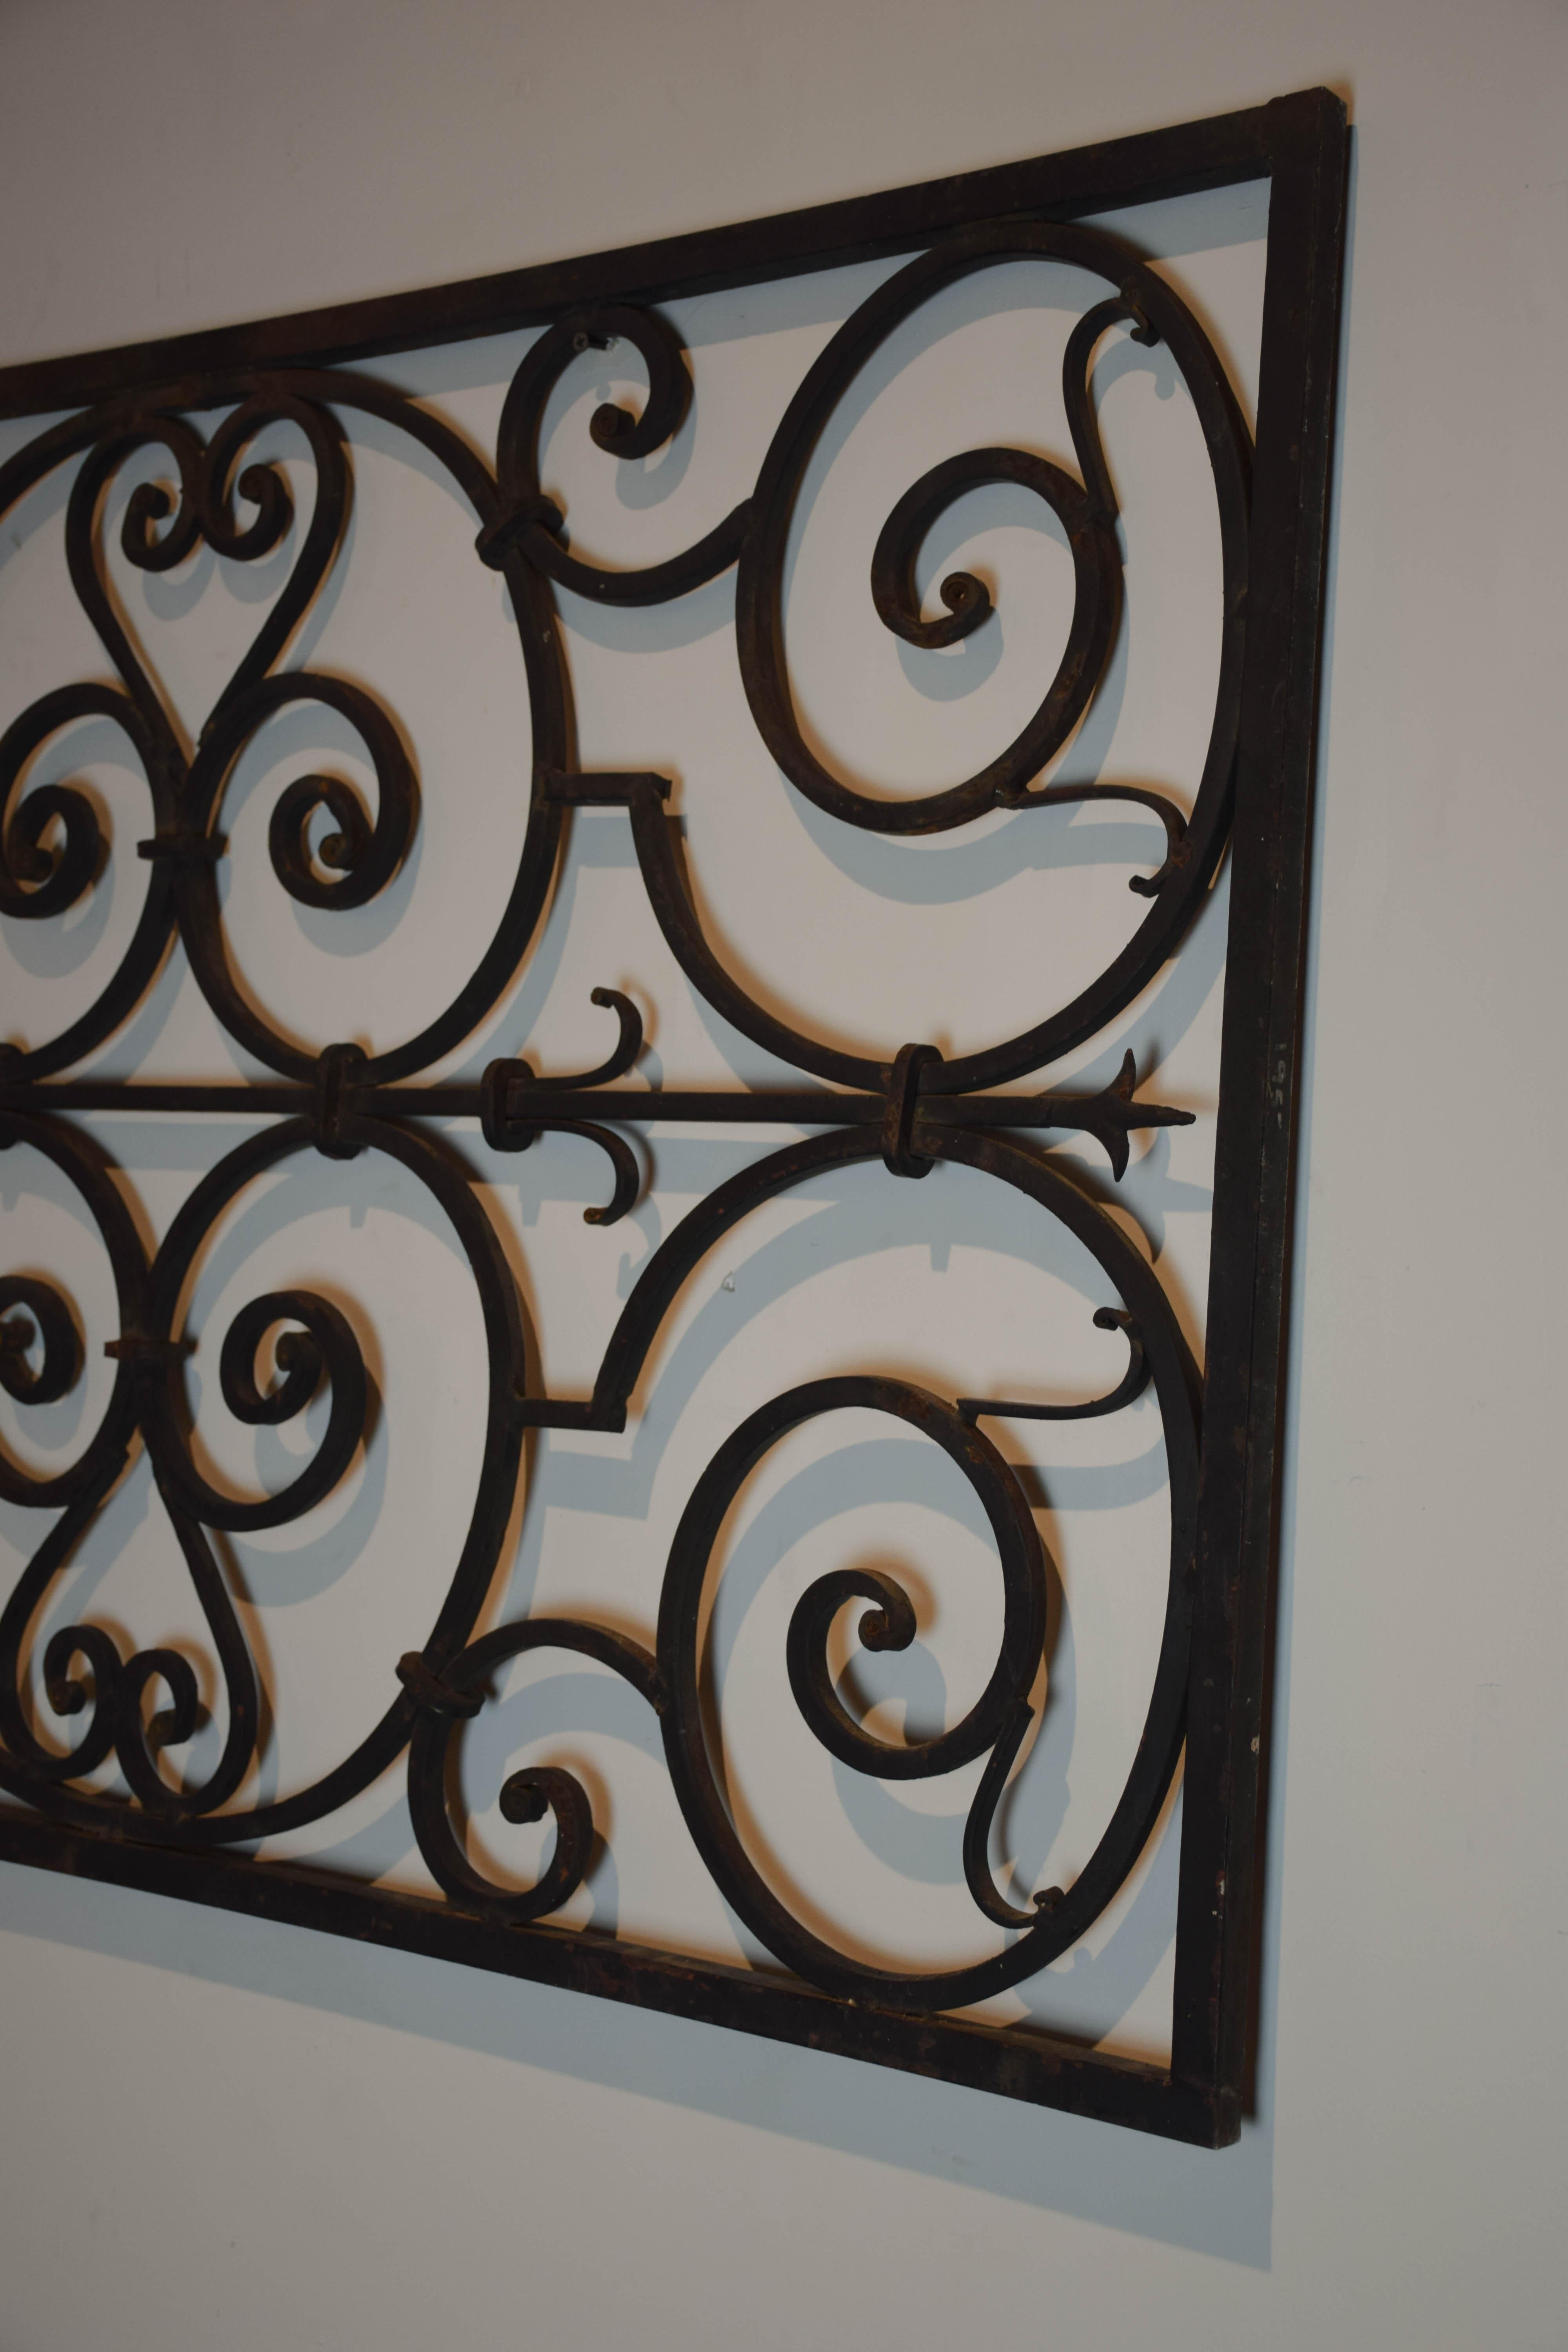 This vintage French wrought iron architectural panel is hand forged in a scroll detail. This piece will add character as a wall or garden accent.